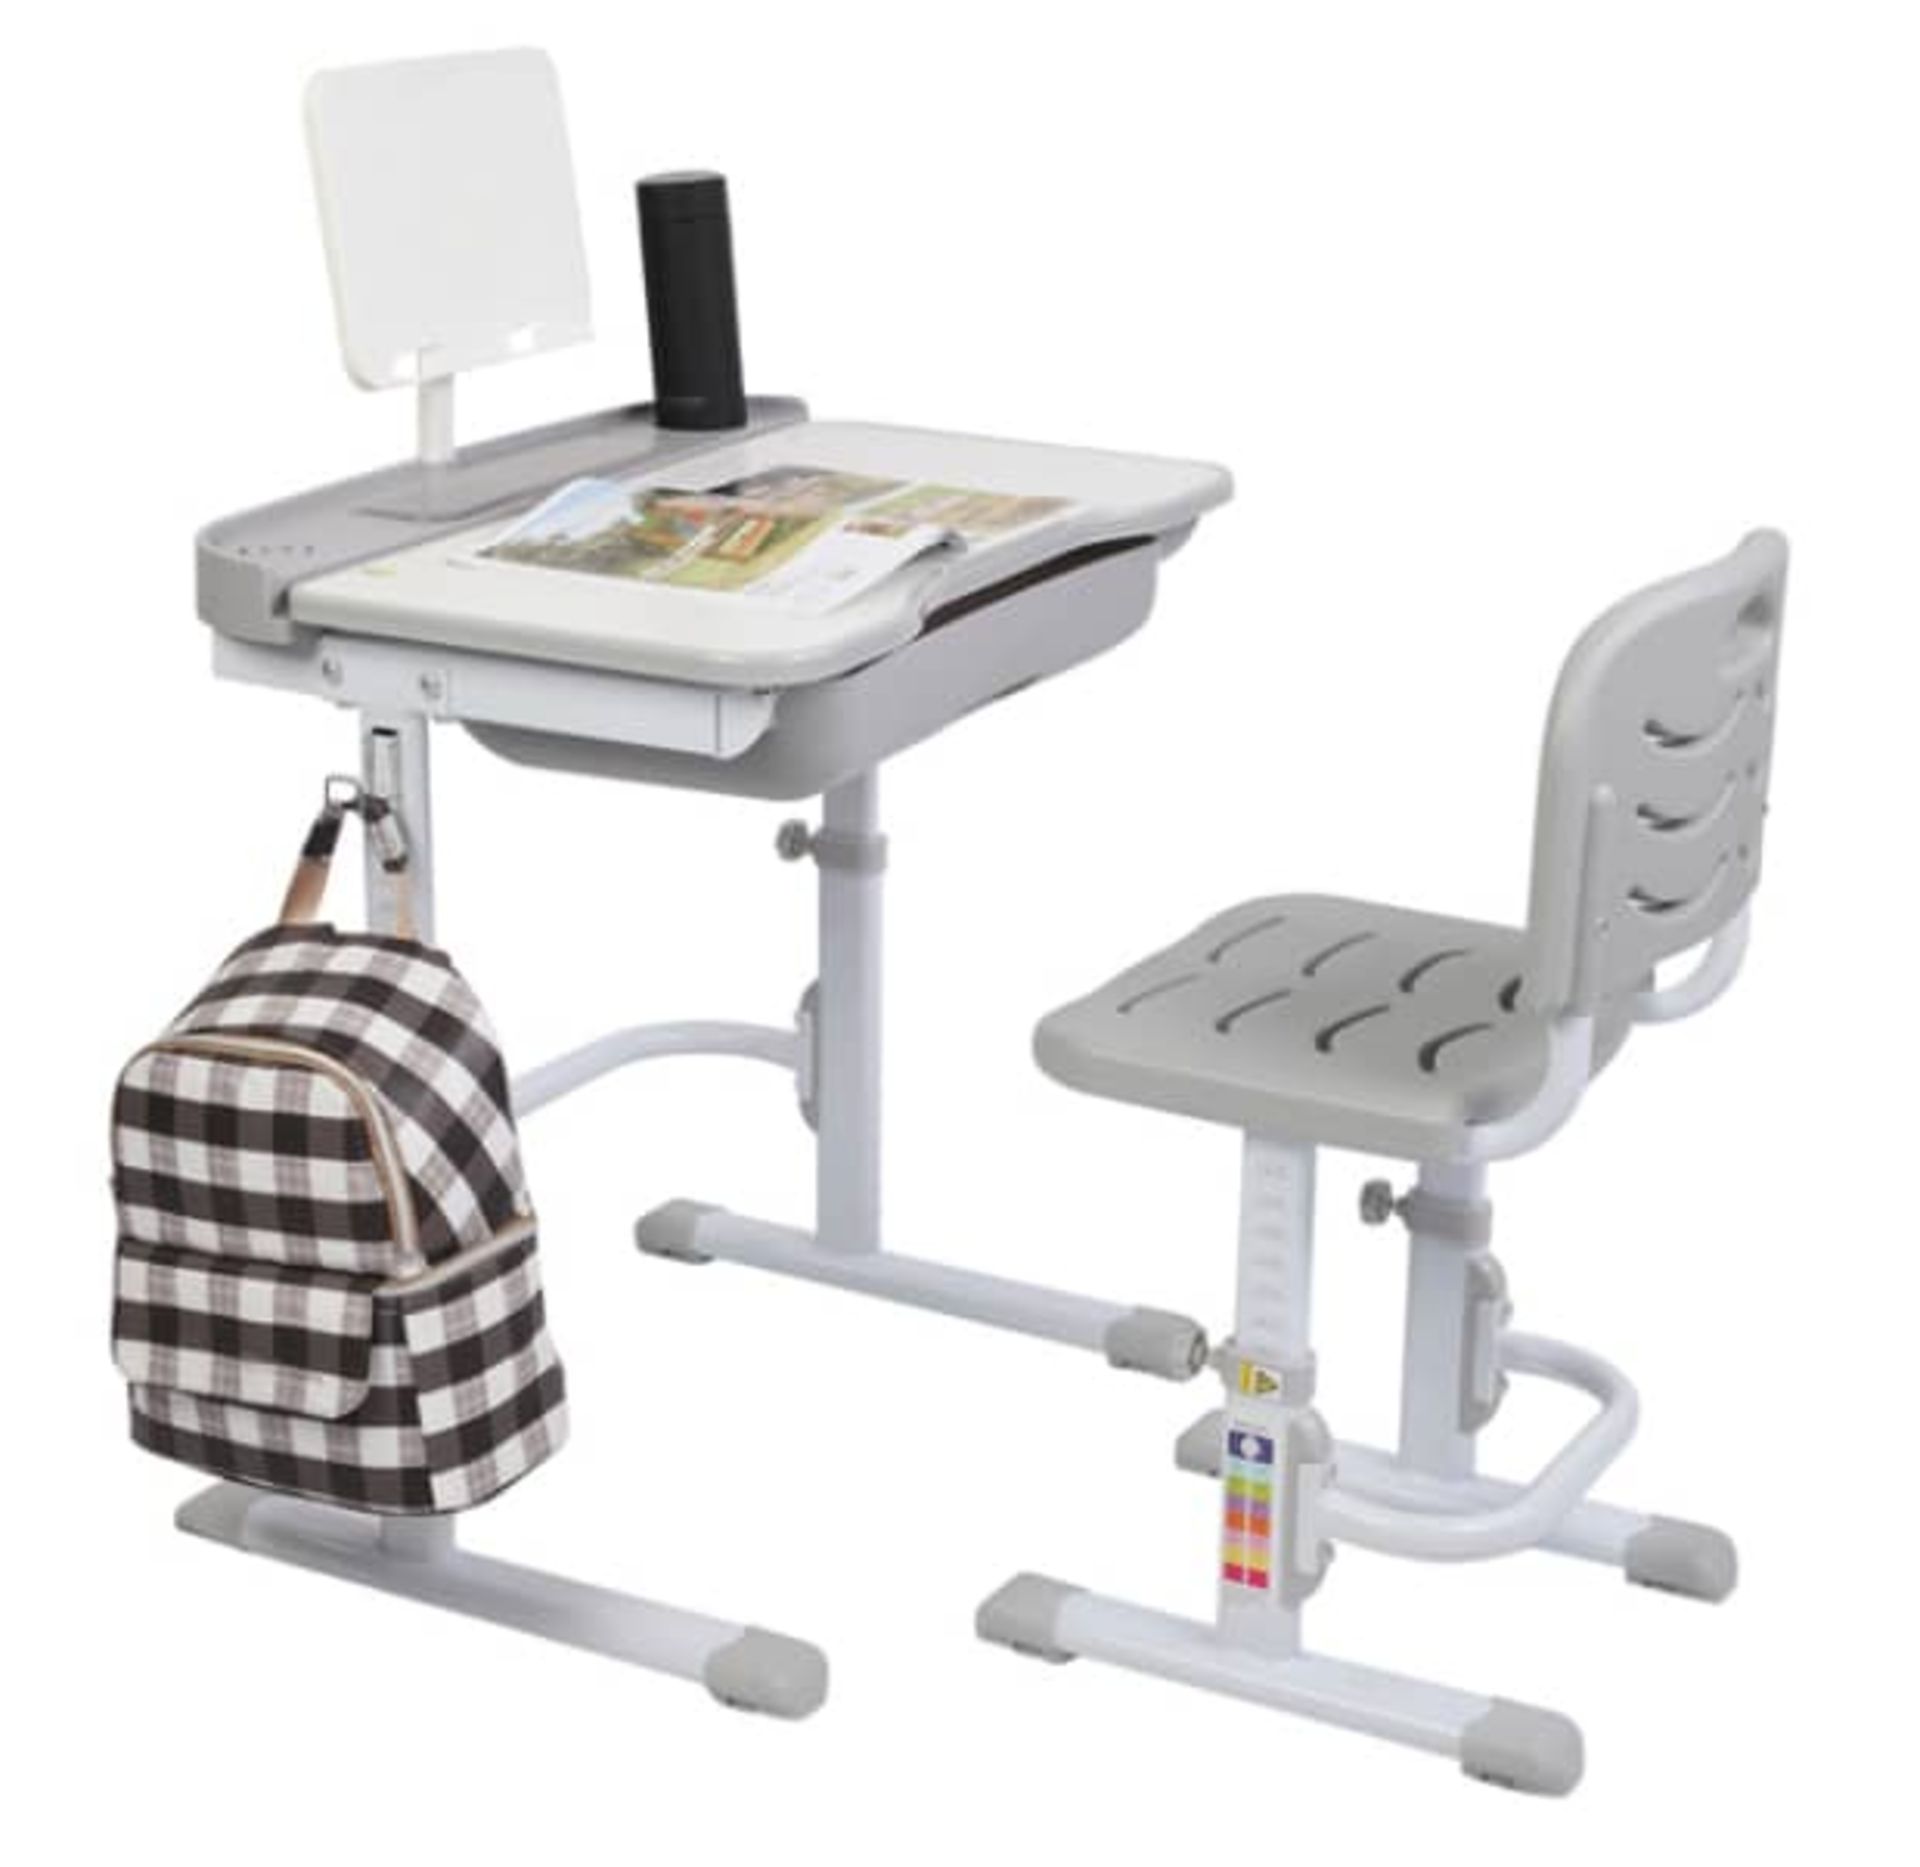 NEW BOXED Height Adjustable Kids Study Desk Chair Set with Drawer & Tilted Desktop Grey. RRP £149.